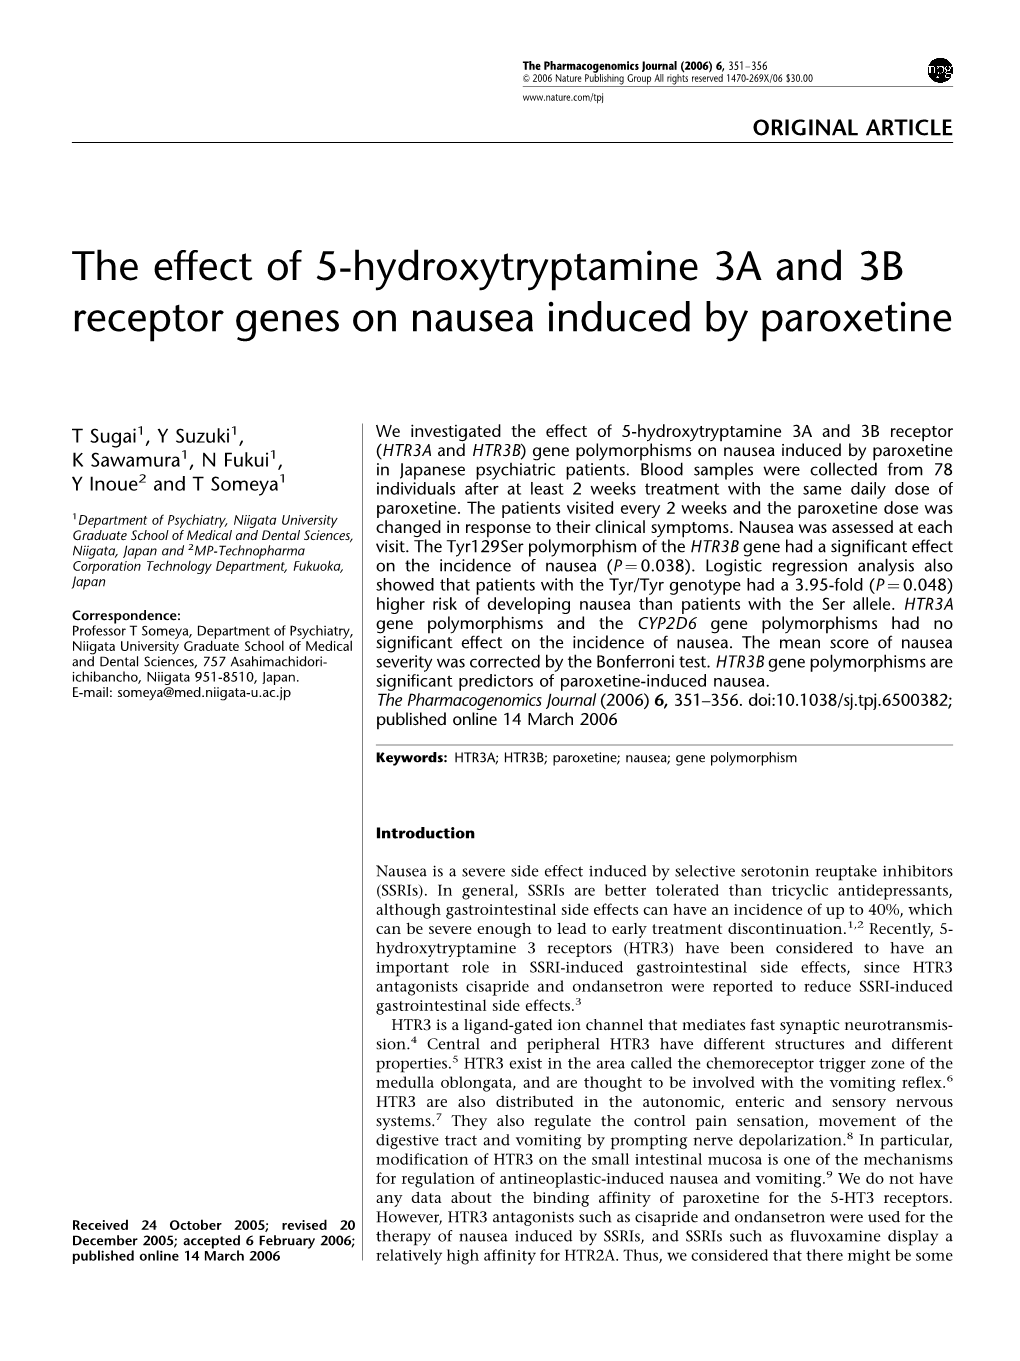 The Effect of 5-Hydroxytryptamine 3A and 3B Receptor Genes on Nausea Induced by Paroxetine